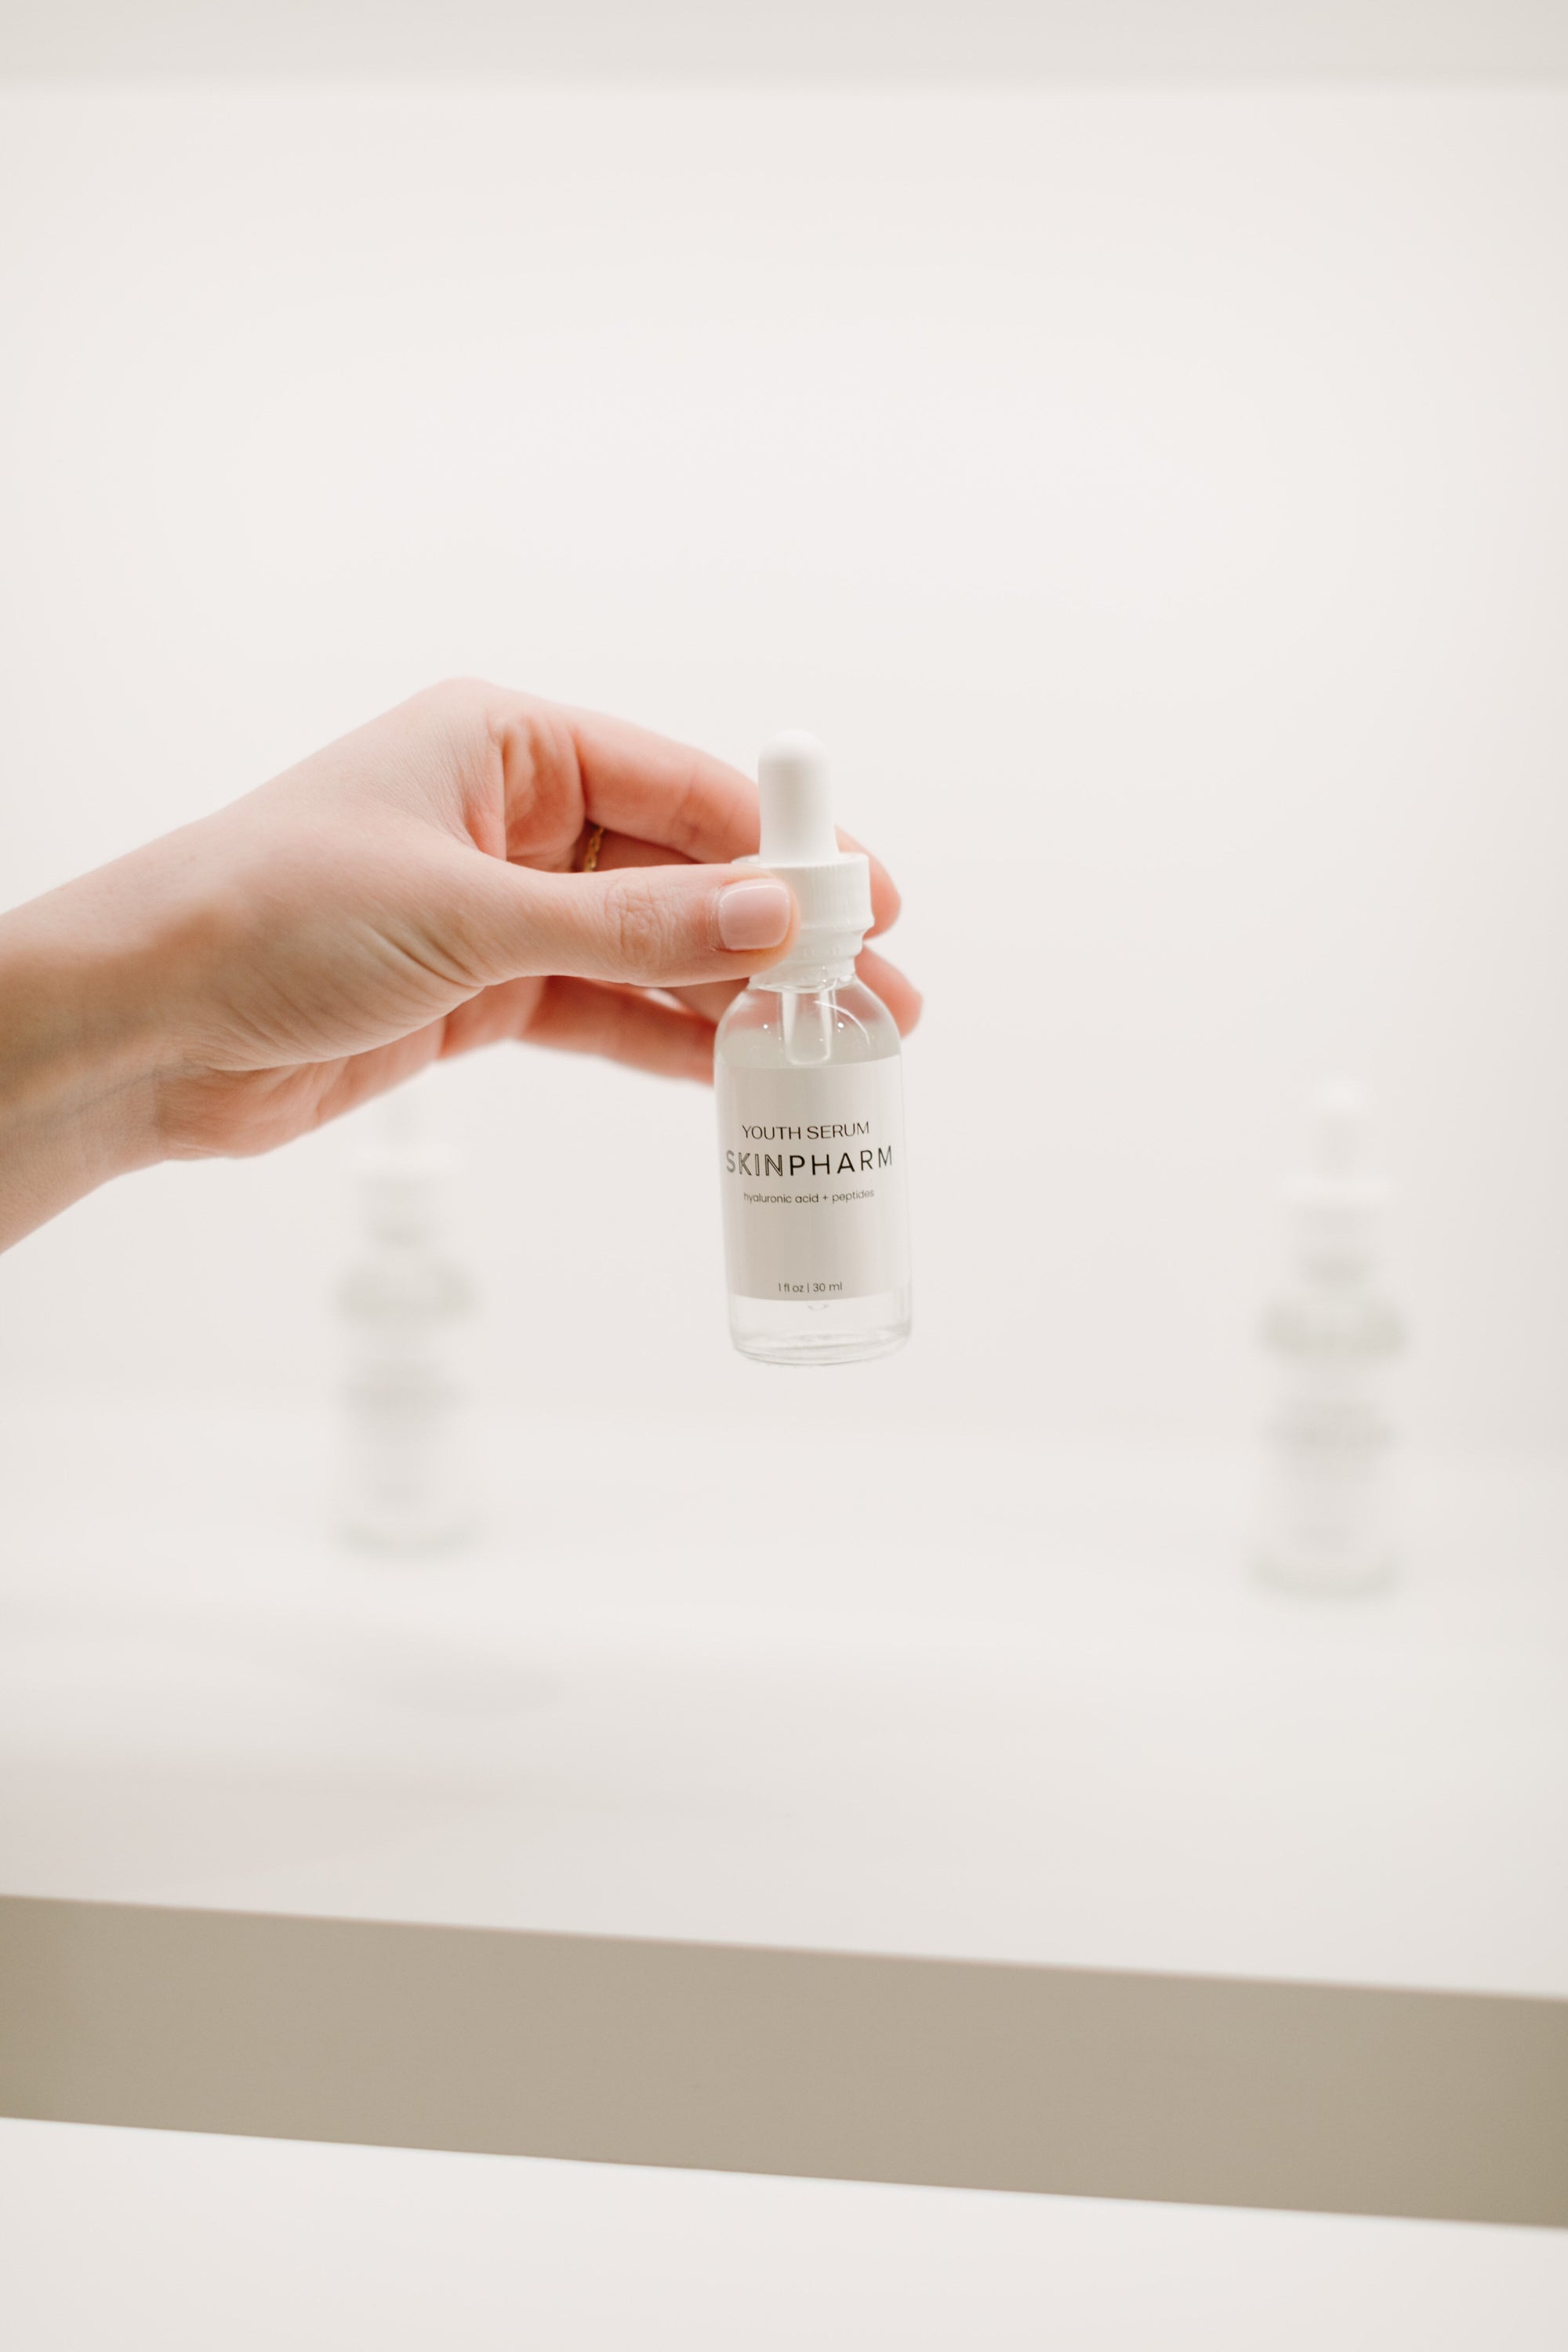 Niacinamide for Breakouts: Does It Help?